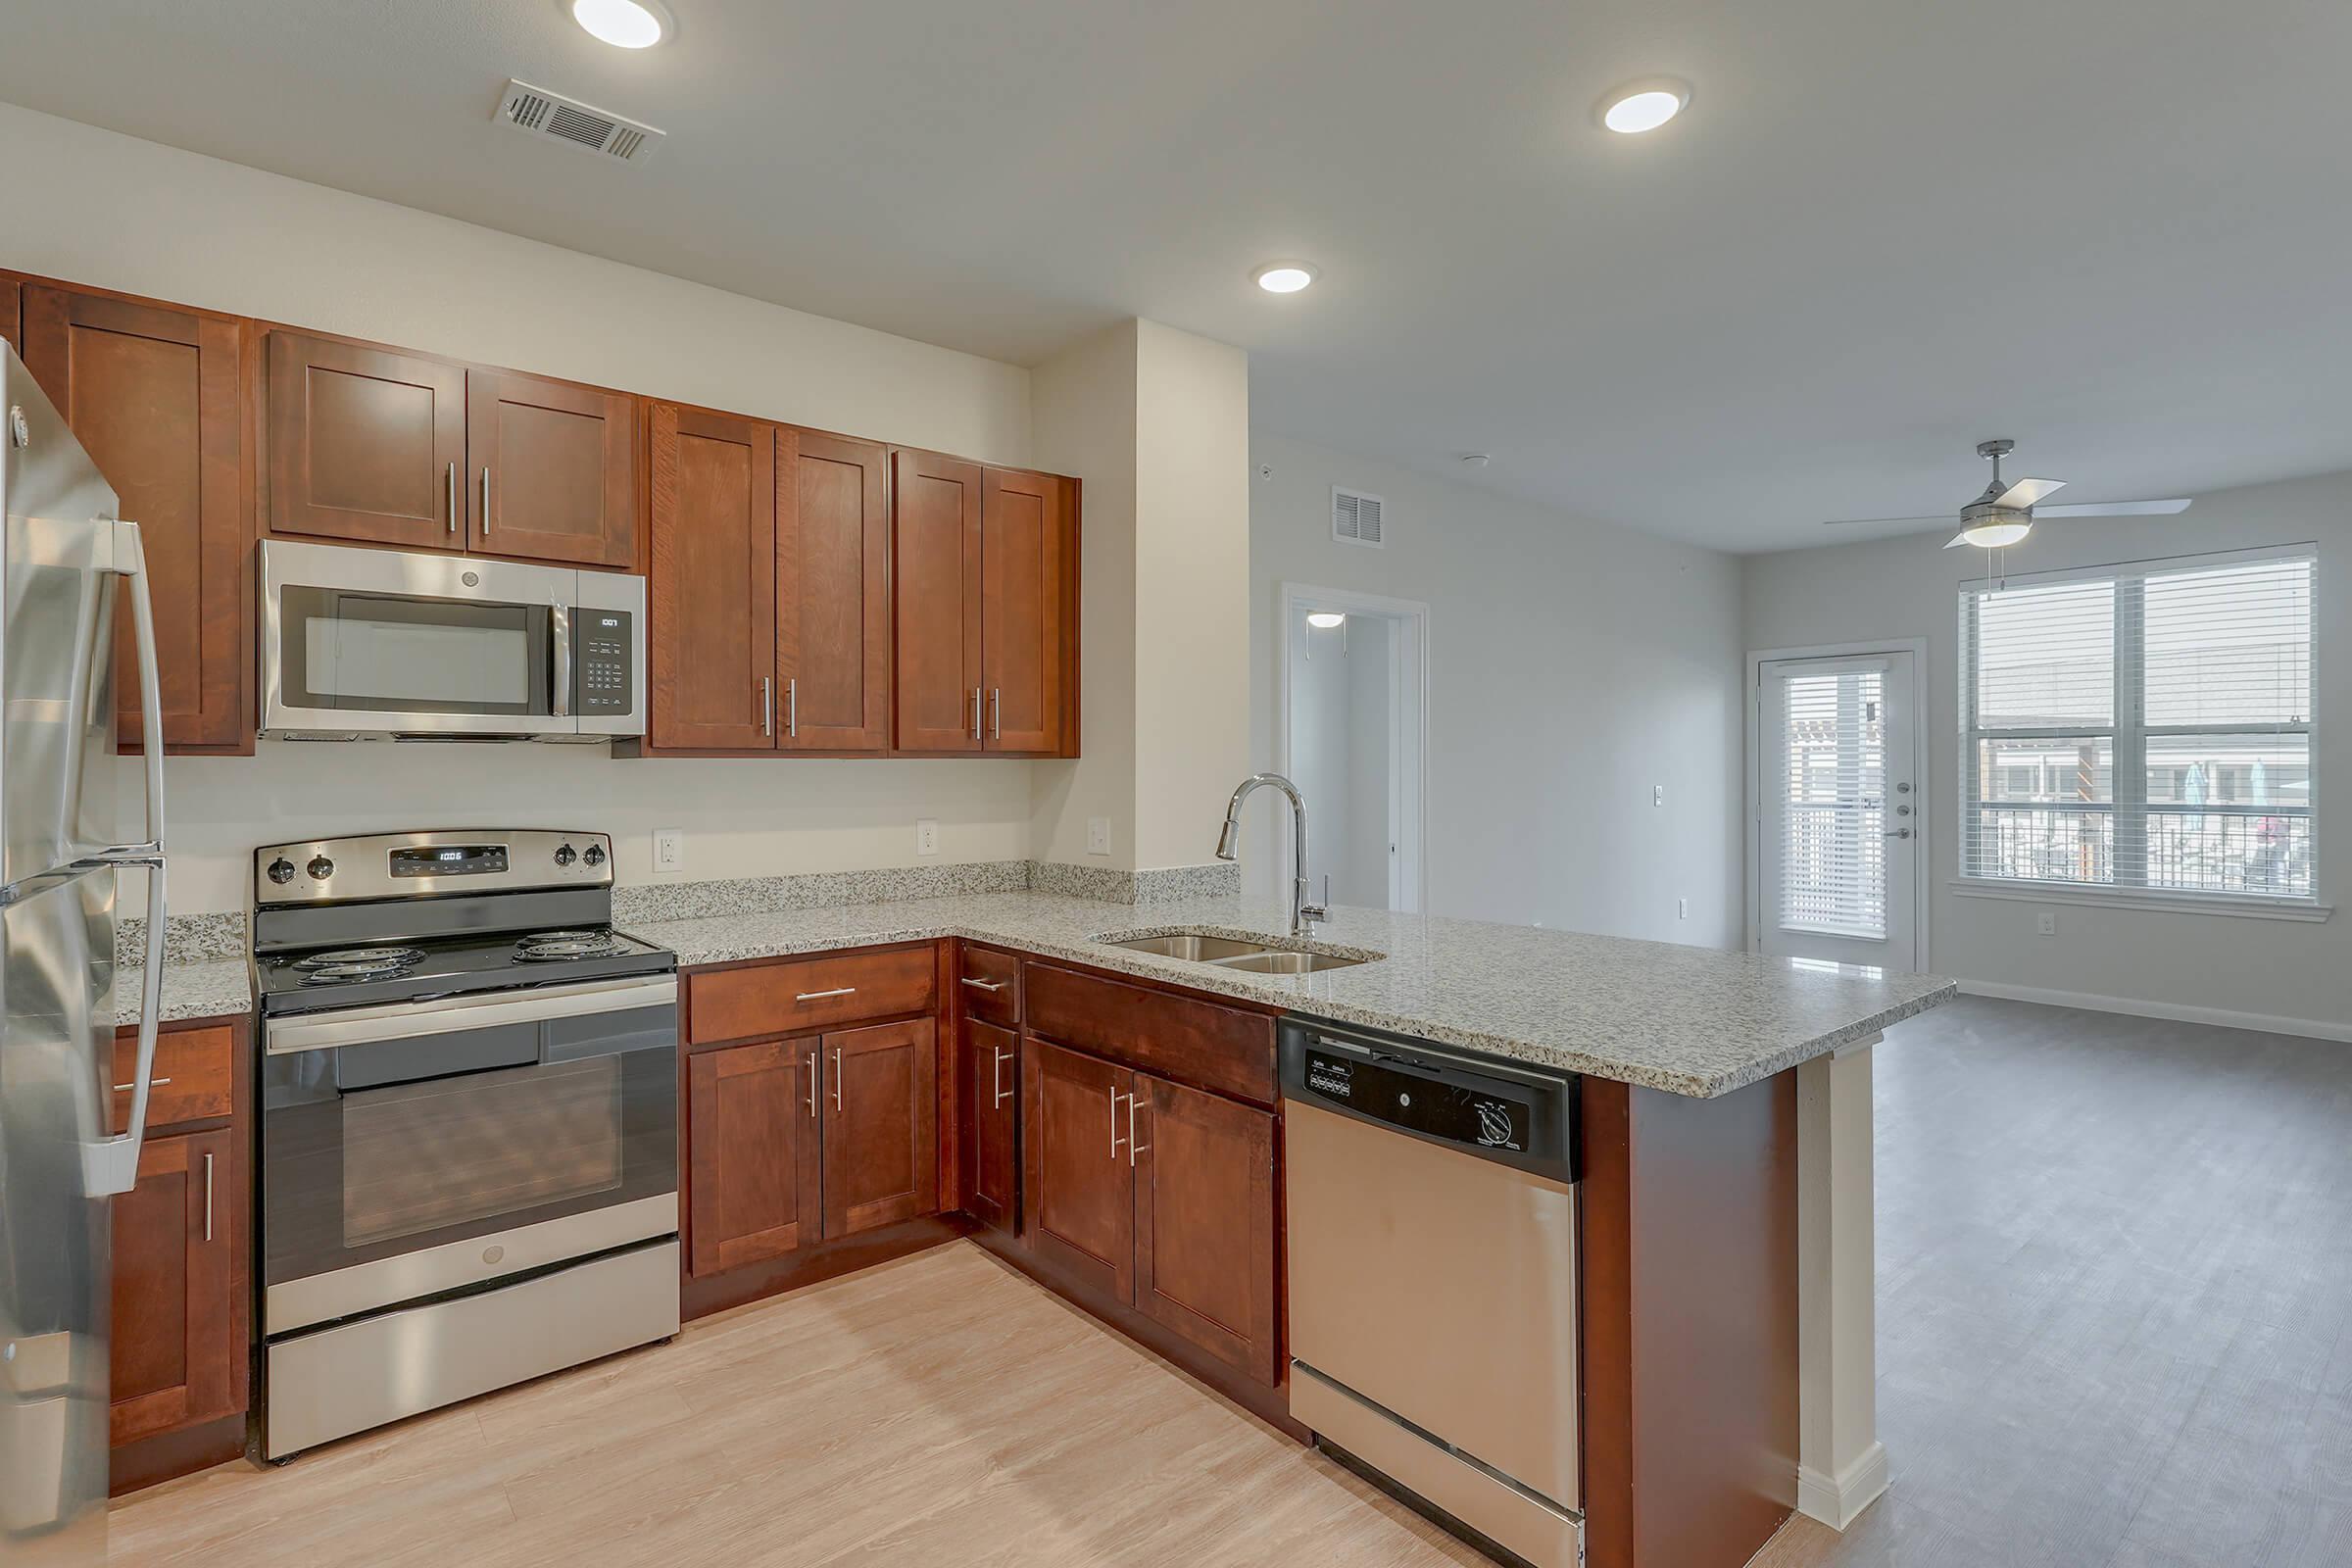 Apartments for Rent in Pflugerville TX – Legacy Ranch at Dessau East Kitchen With Stainless Steel Appliances, and Modern Dark Wood Cabinets